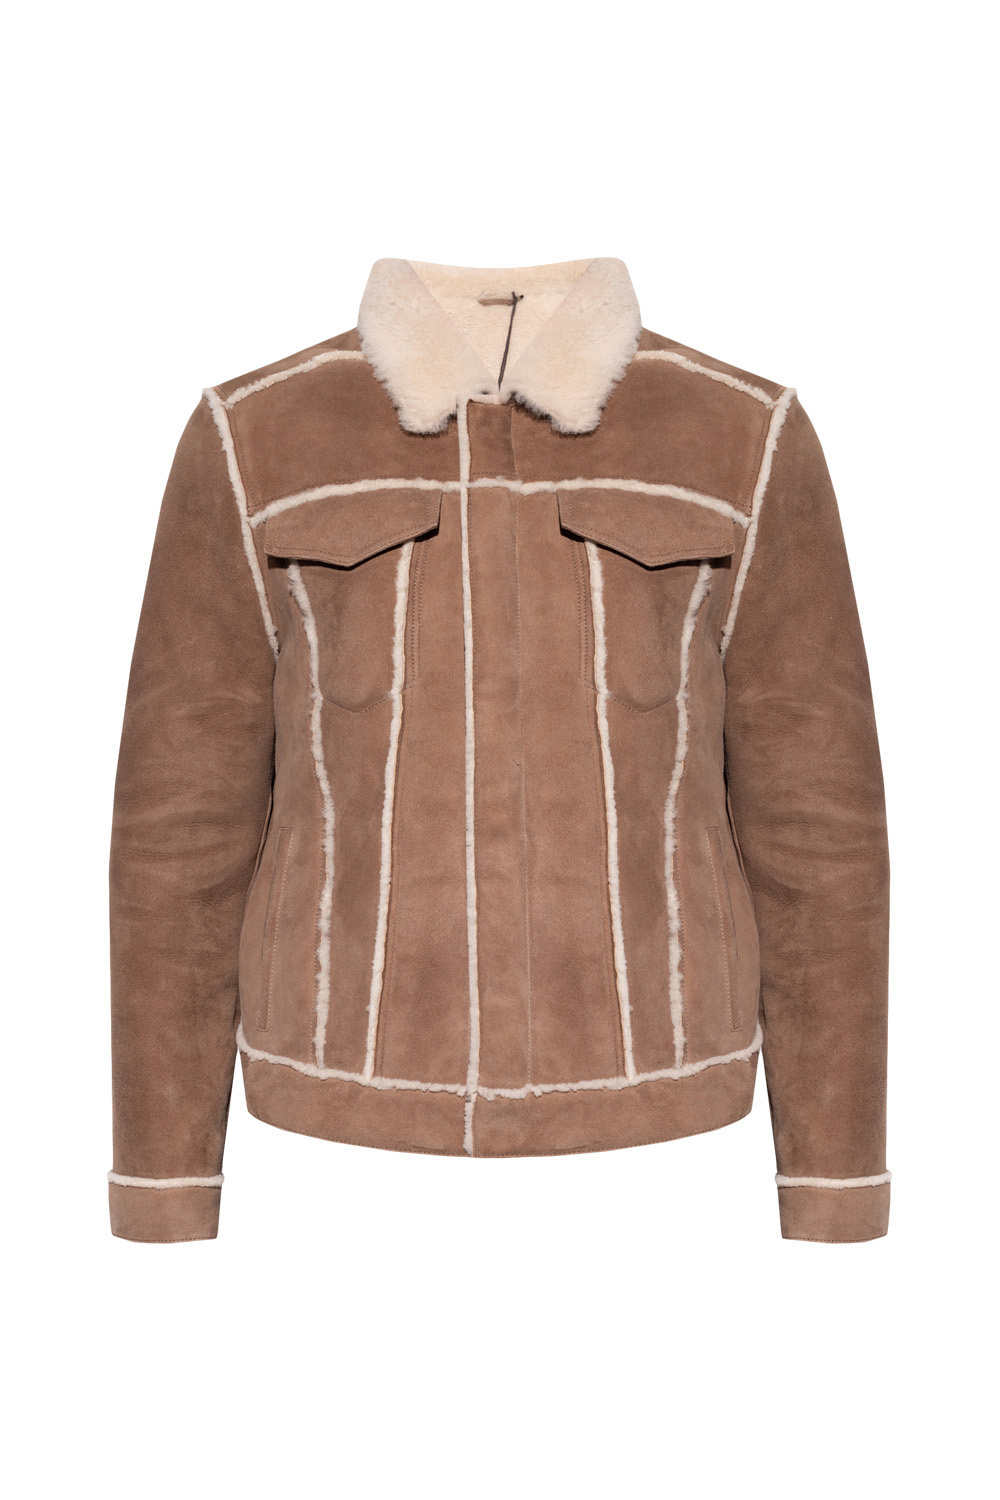 All Saints Hayle Shearling Jacket